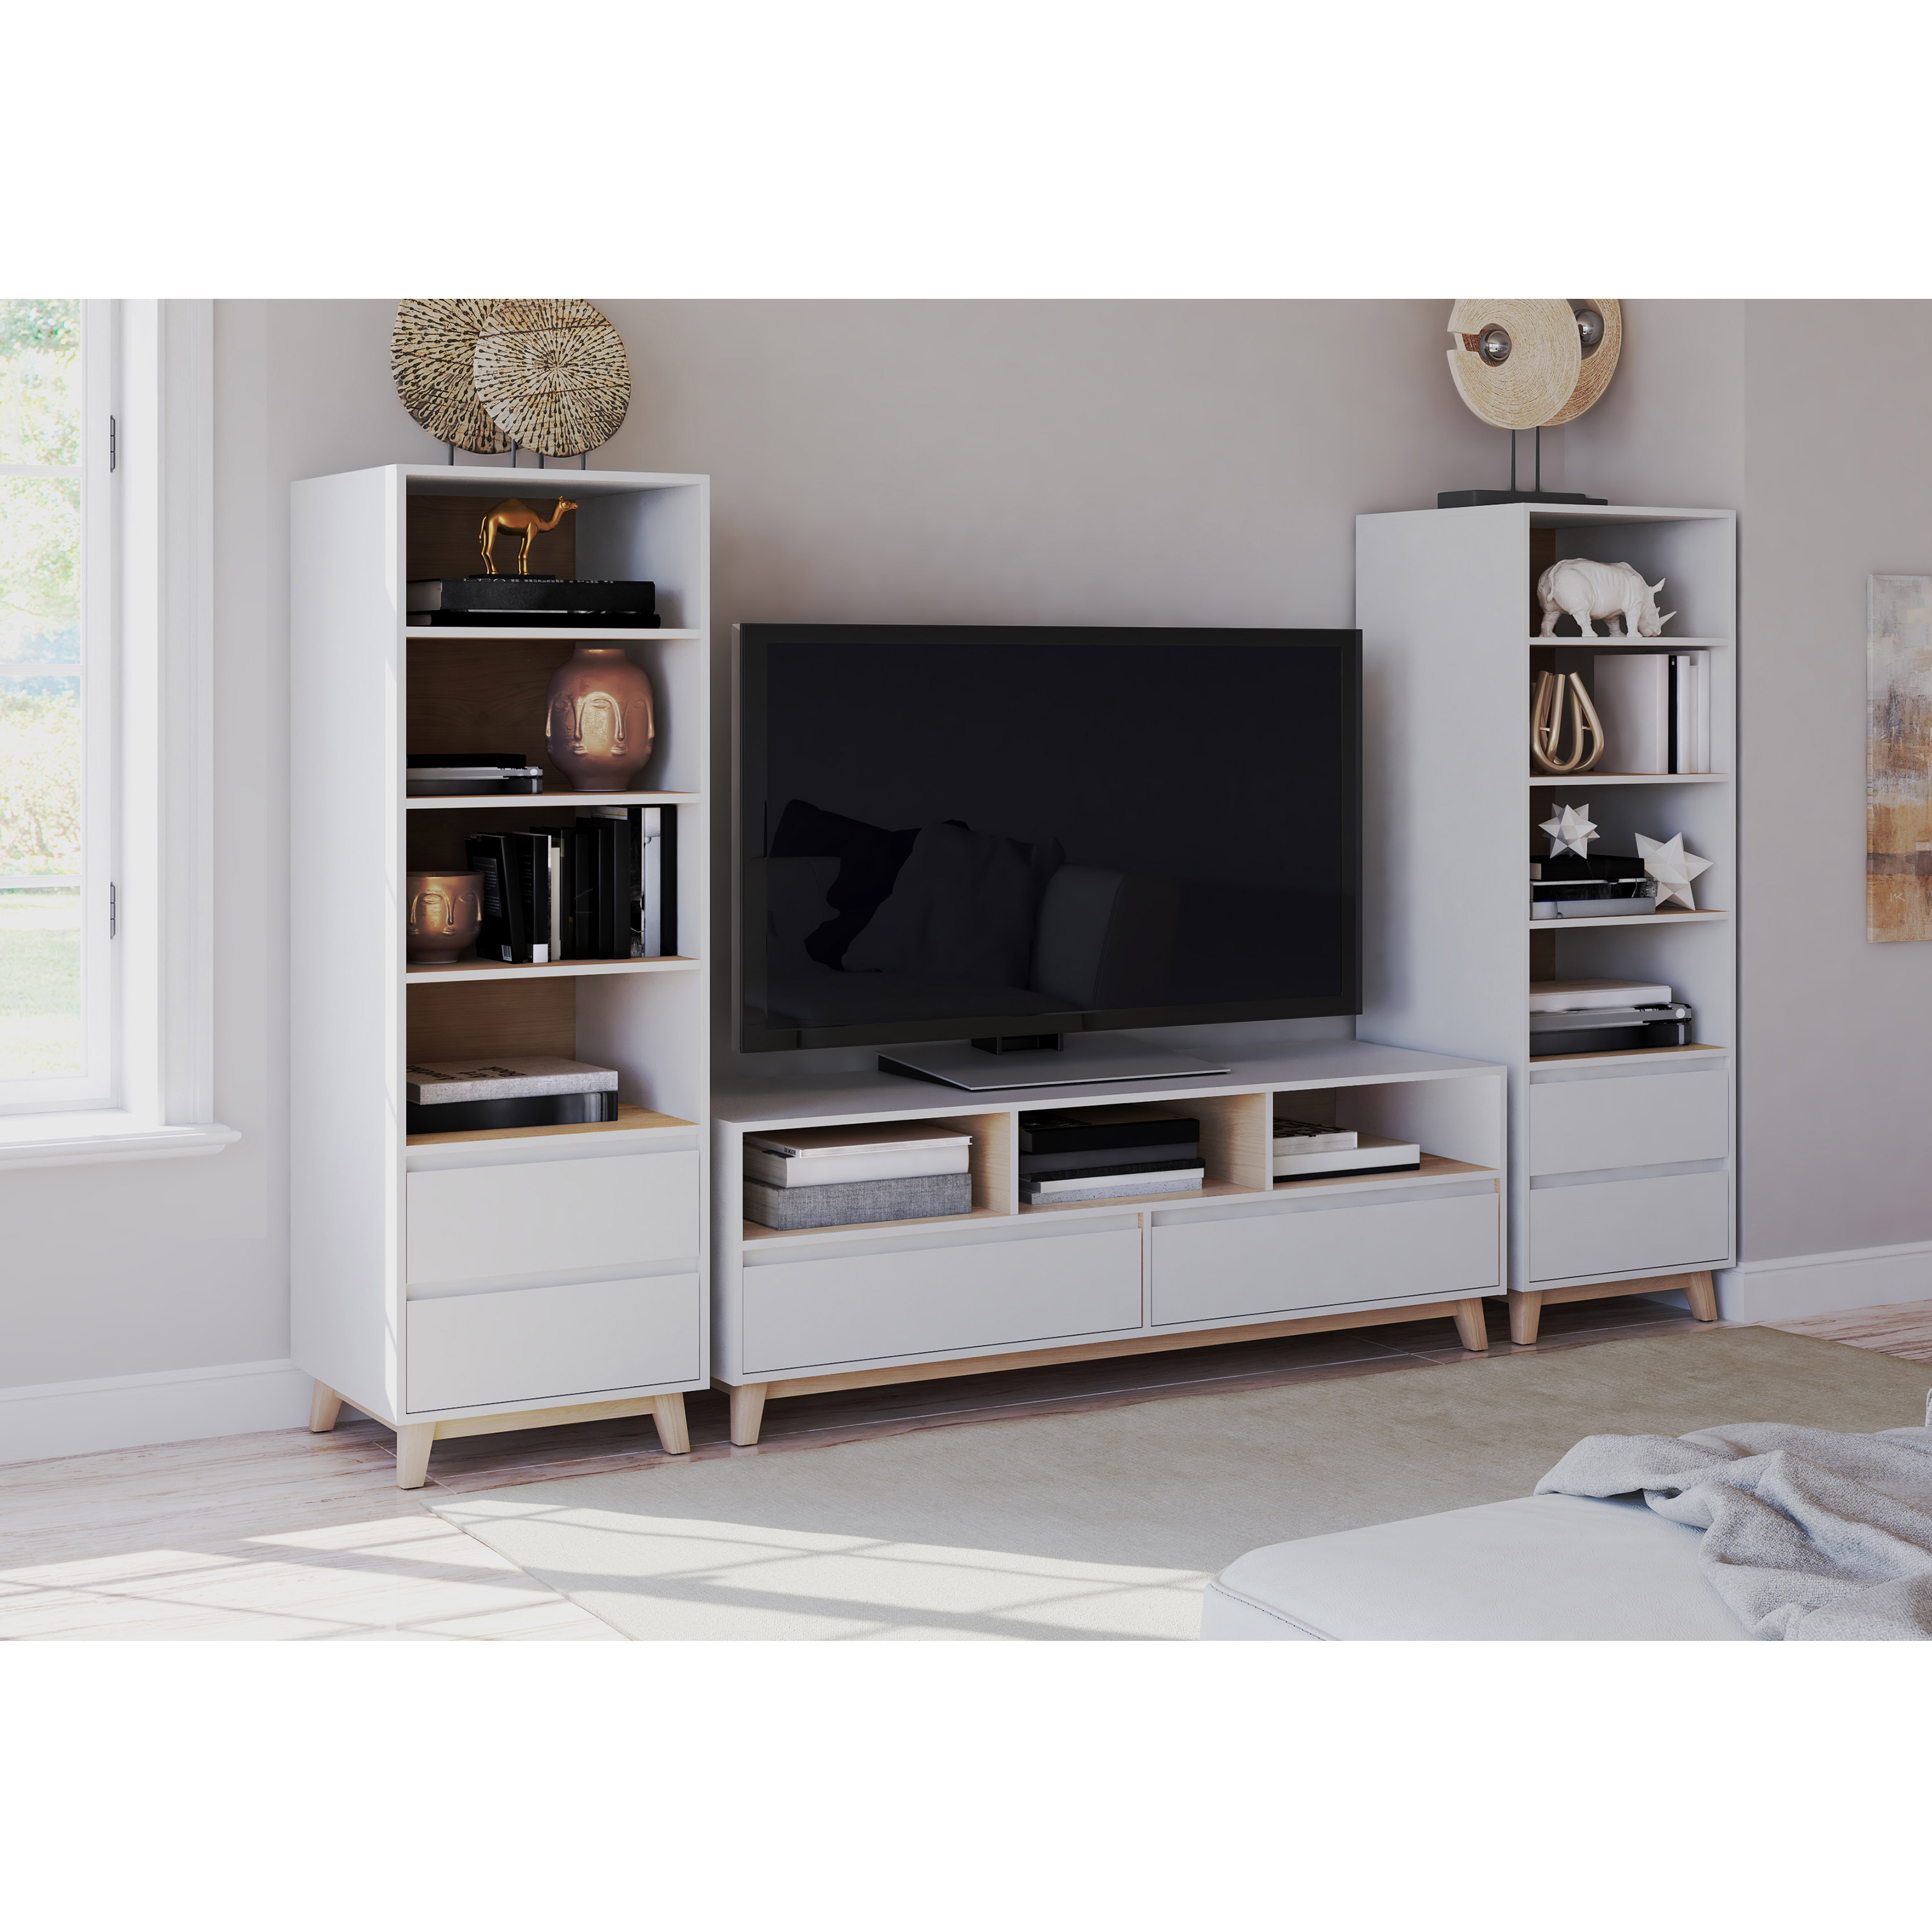 Mainstays Mid-Century TV Stand for TVs up to 70", White Finish - image 3 of 8